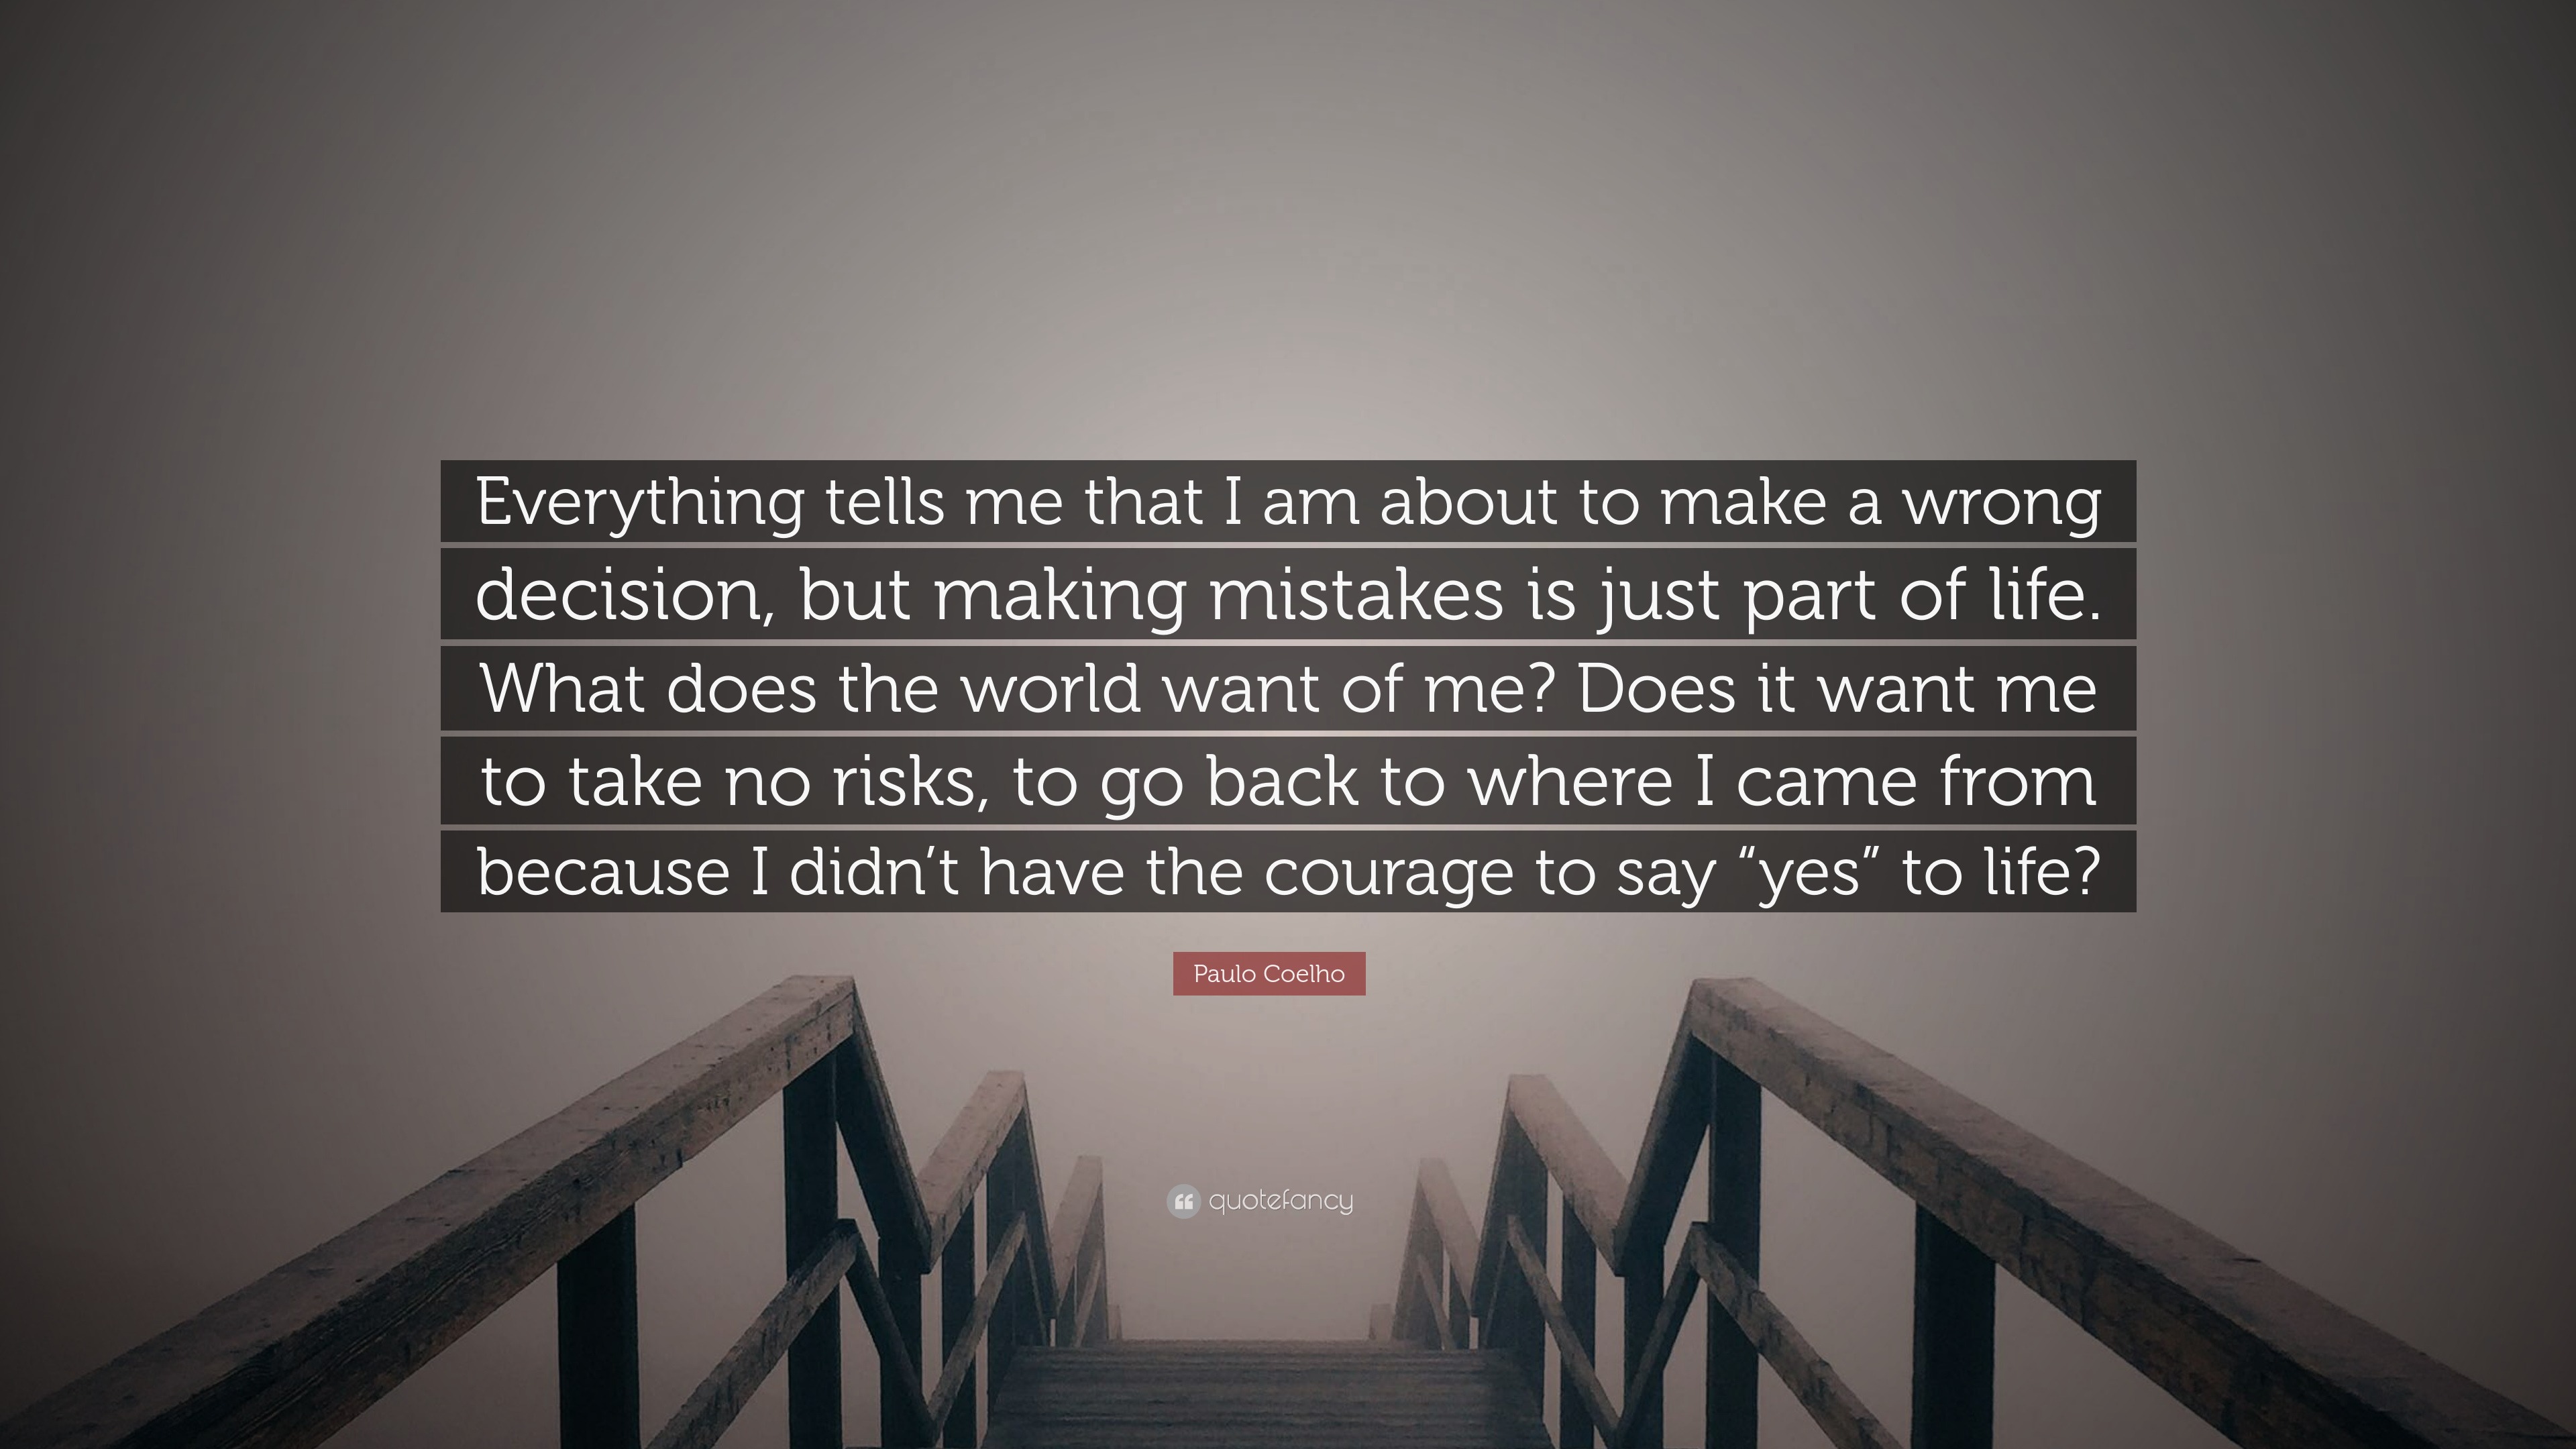 Paulo Coelho Quote: “Everything tells me that I am about to make a